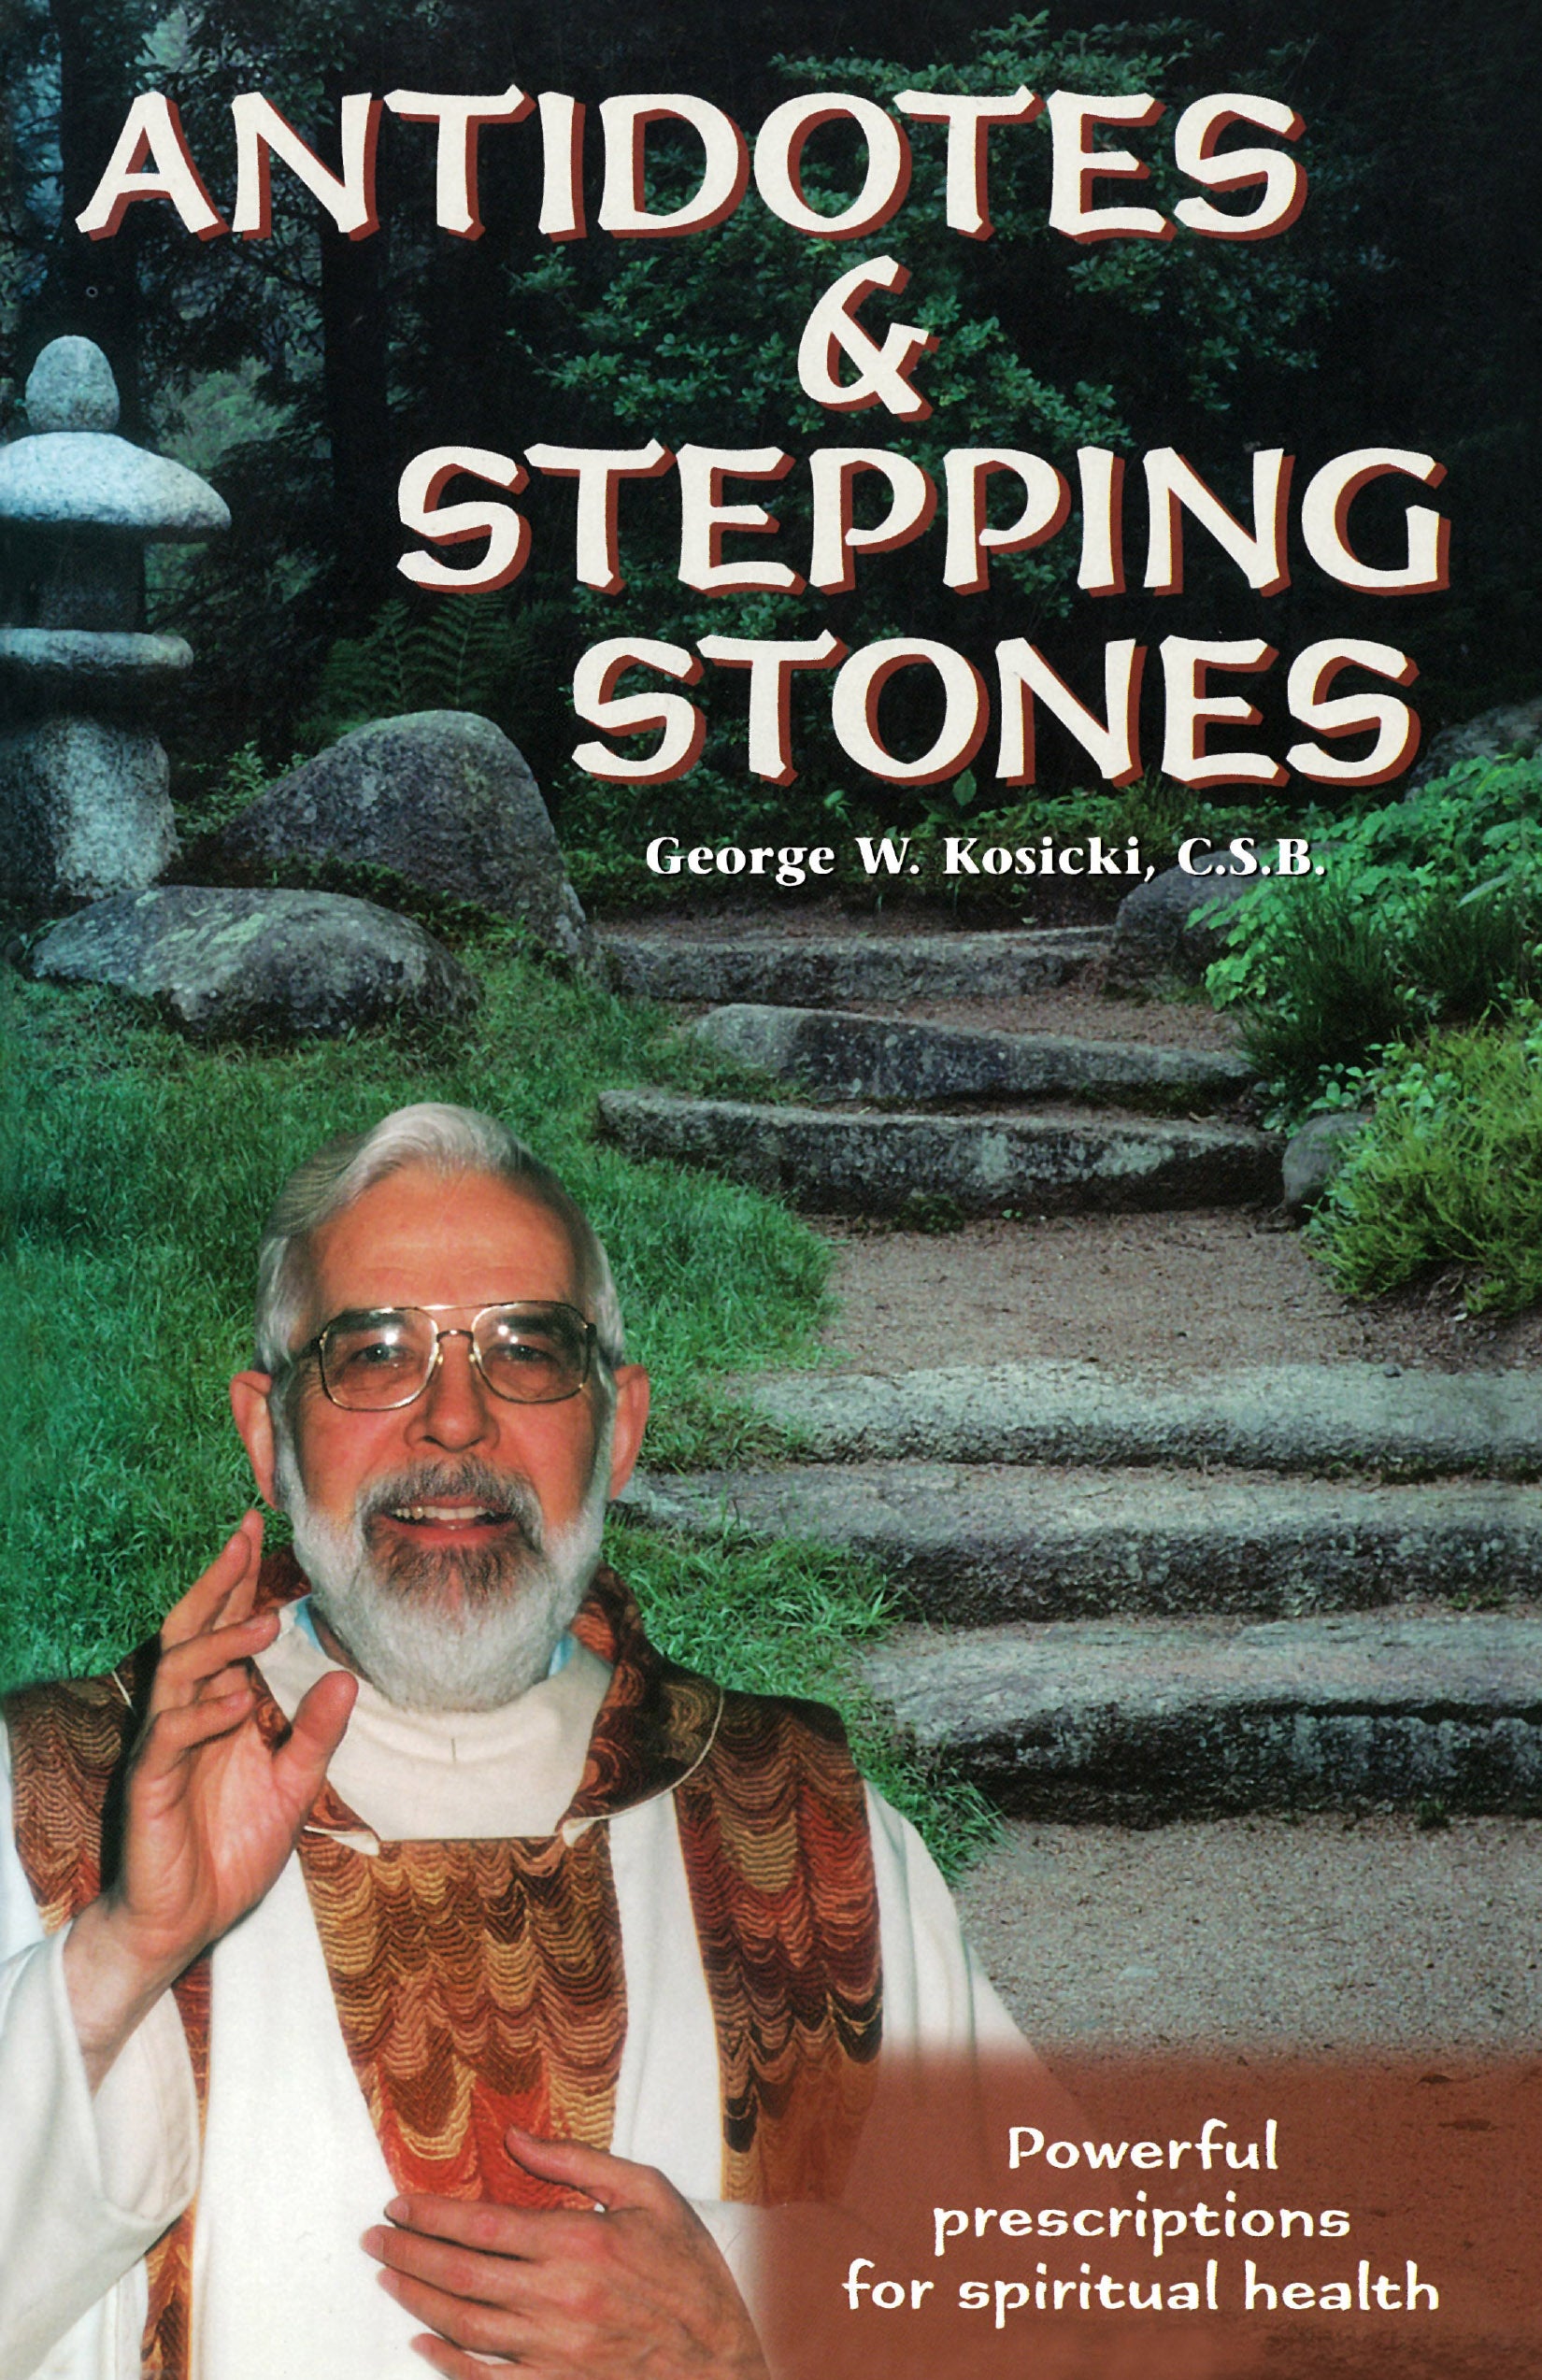 Antidotes and Stepping Stones by Fr. George W. Kosicki CSB